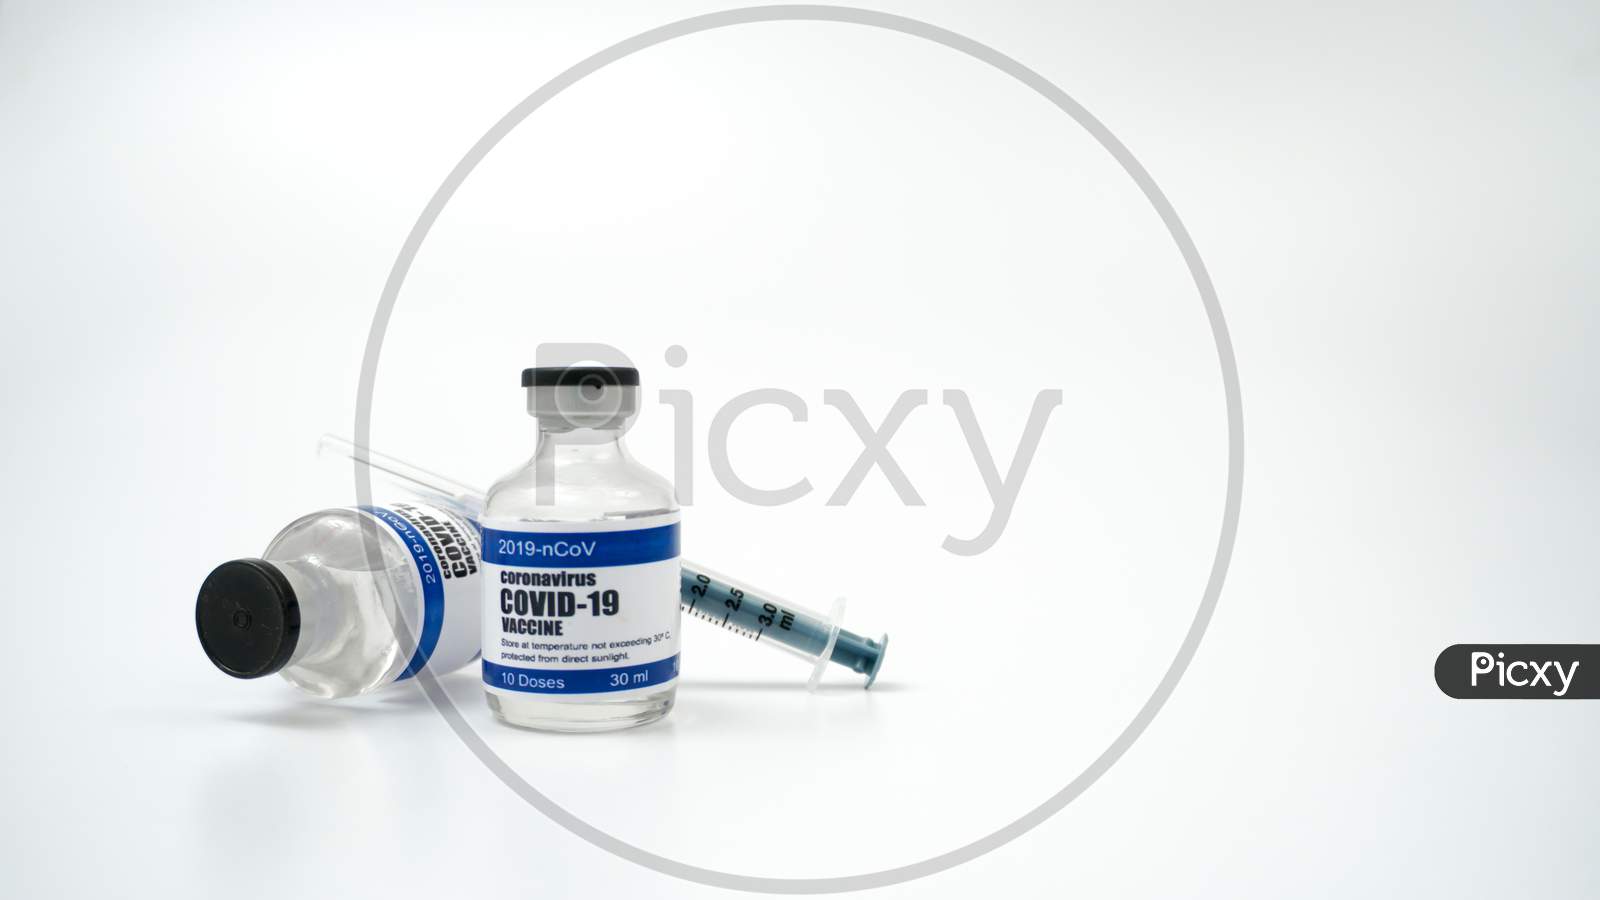 Covid-19 Corona Virus 2019-Ncov Vaccine Vials Medicine Drug Bottles Syringe Injection. Vaccination, Immunization, Treatment To Cure Covid 19 Corona Virus Infection. Healthcare And Medical Concept.